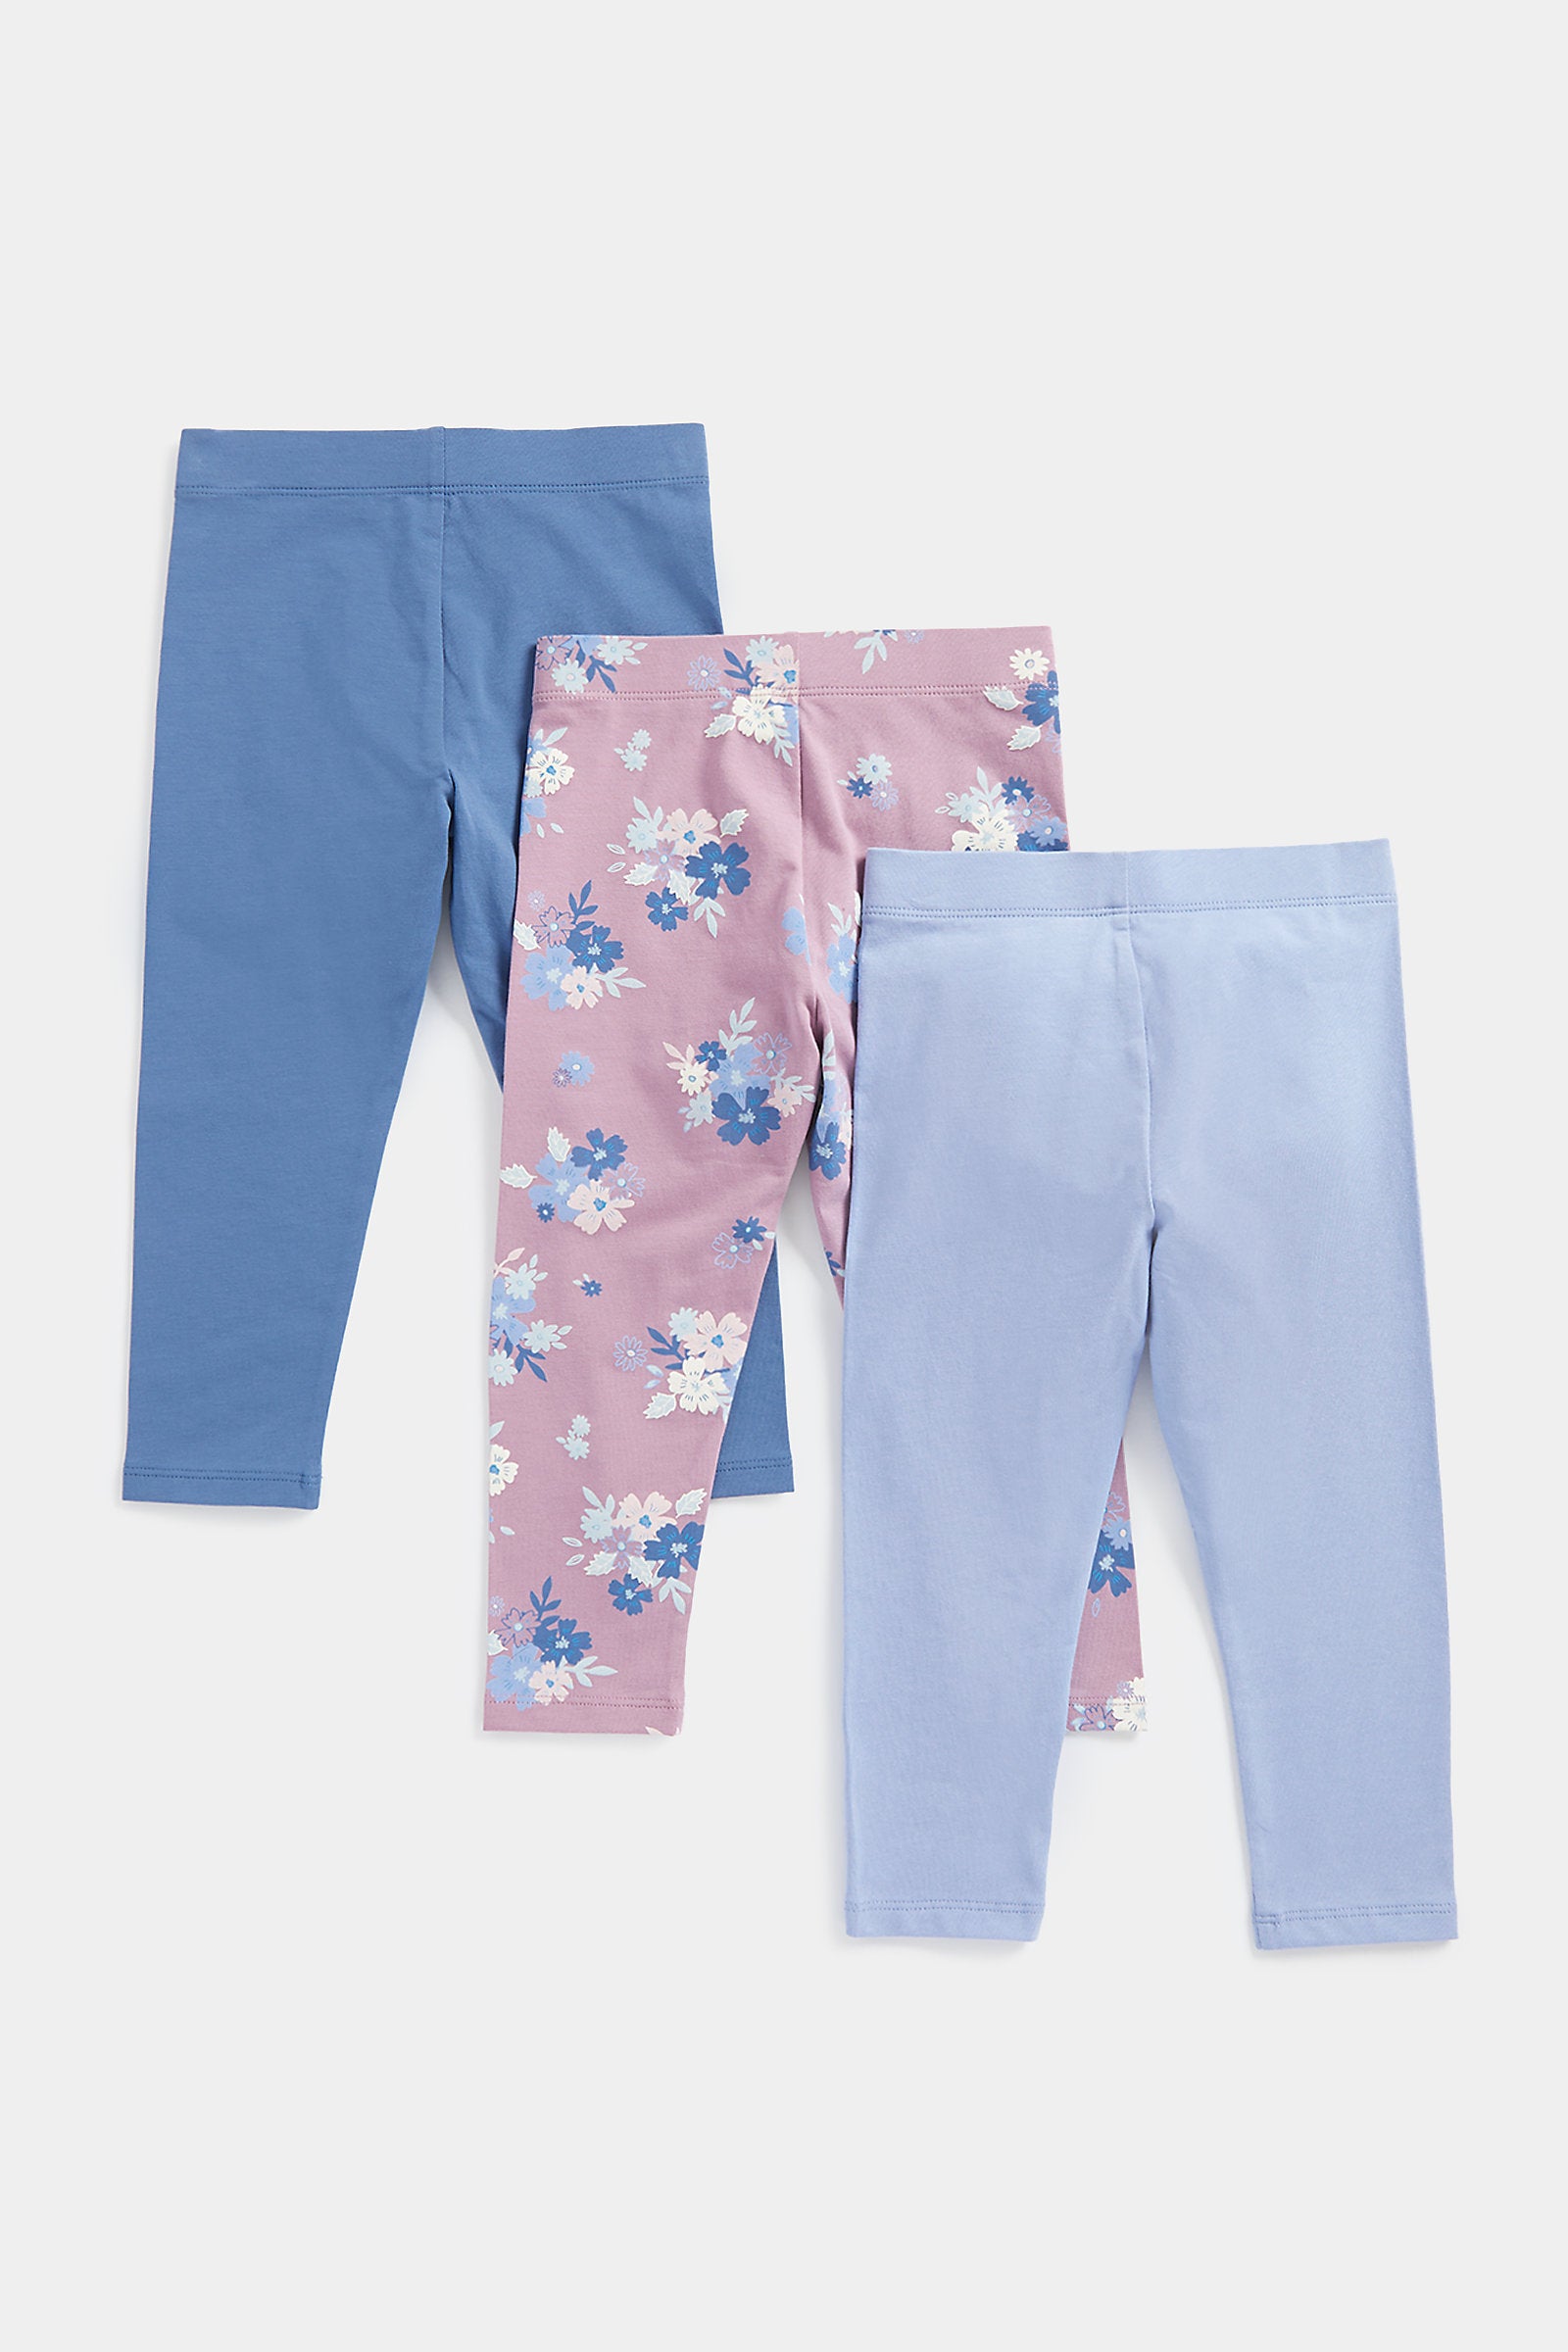 Mothercare Blue and Floral Leggings - 3 Pack